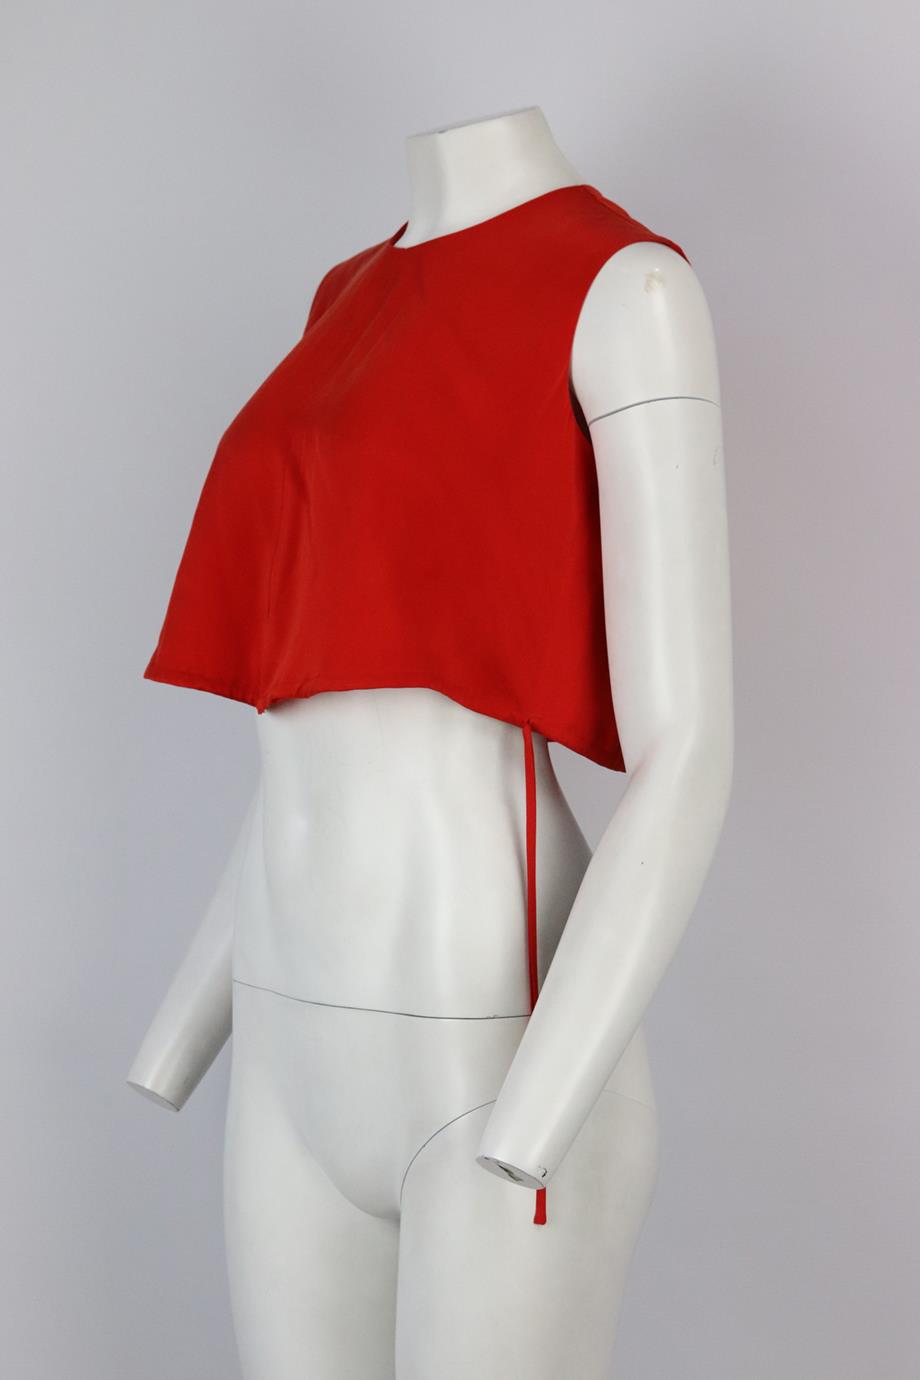 TOVE CROPPED SILK TOP FR 36 UK 8